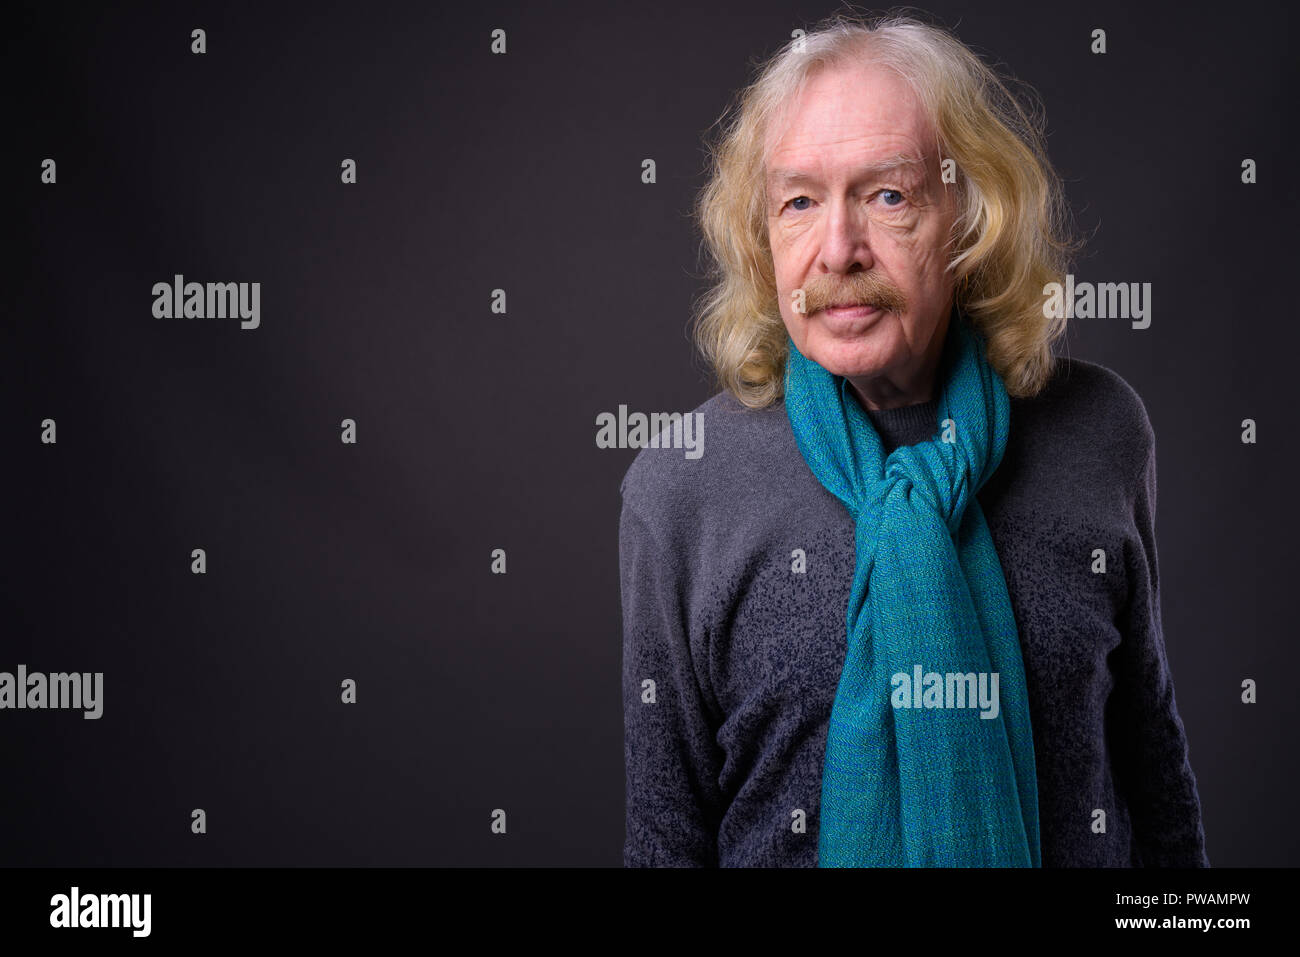 Senior man with mustache against gray background Stock Photo